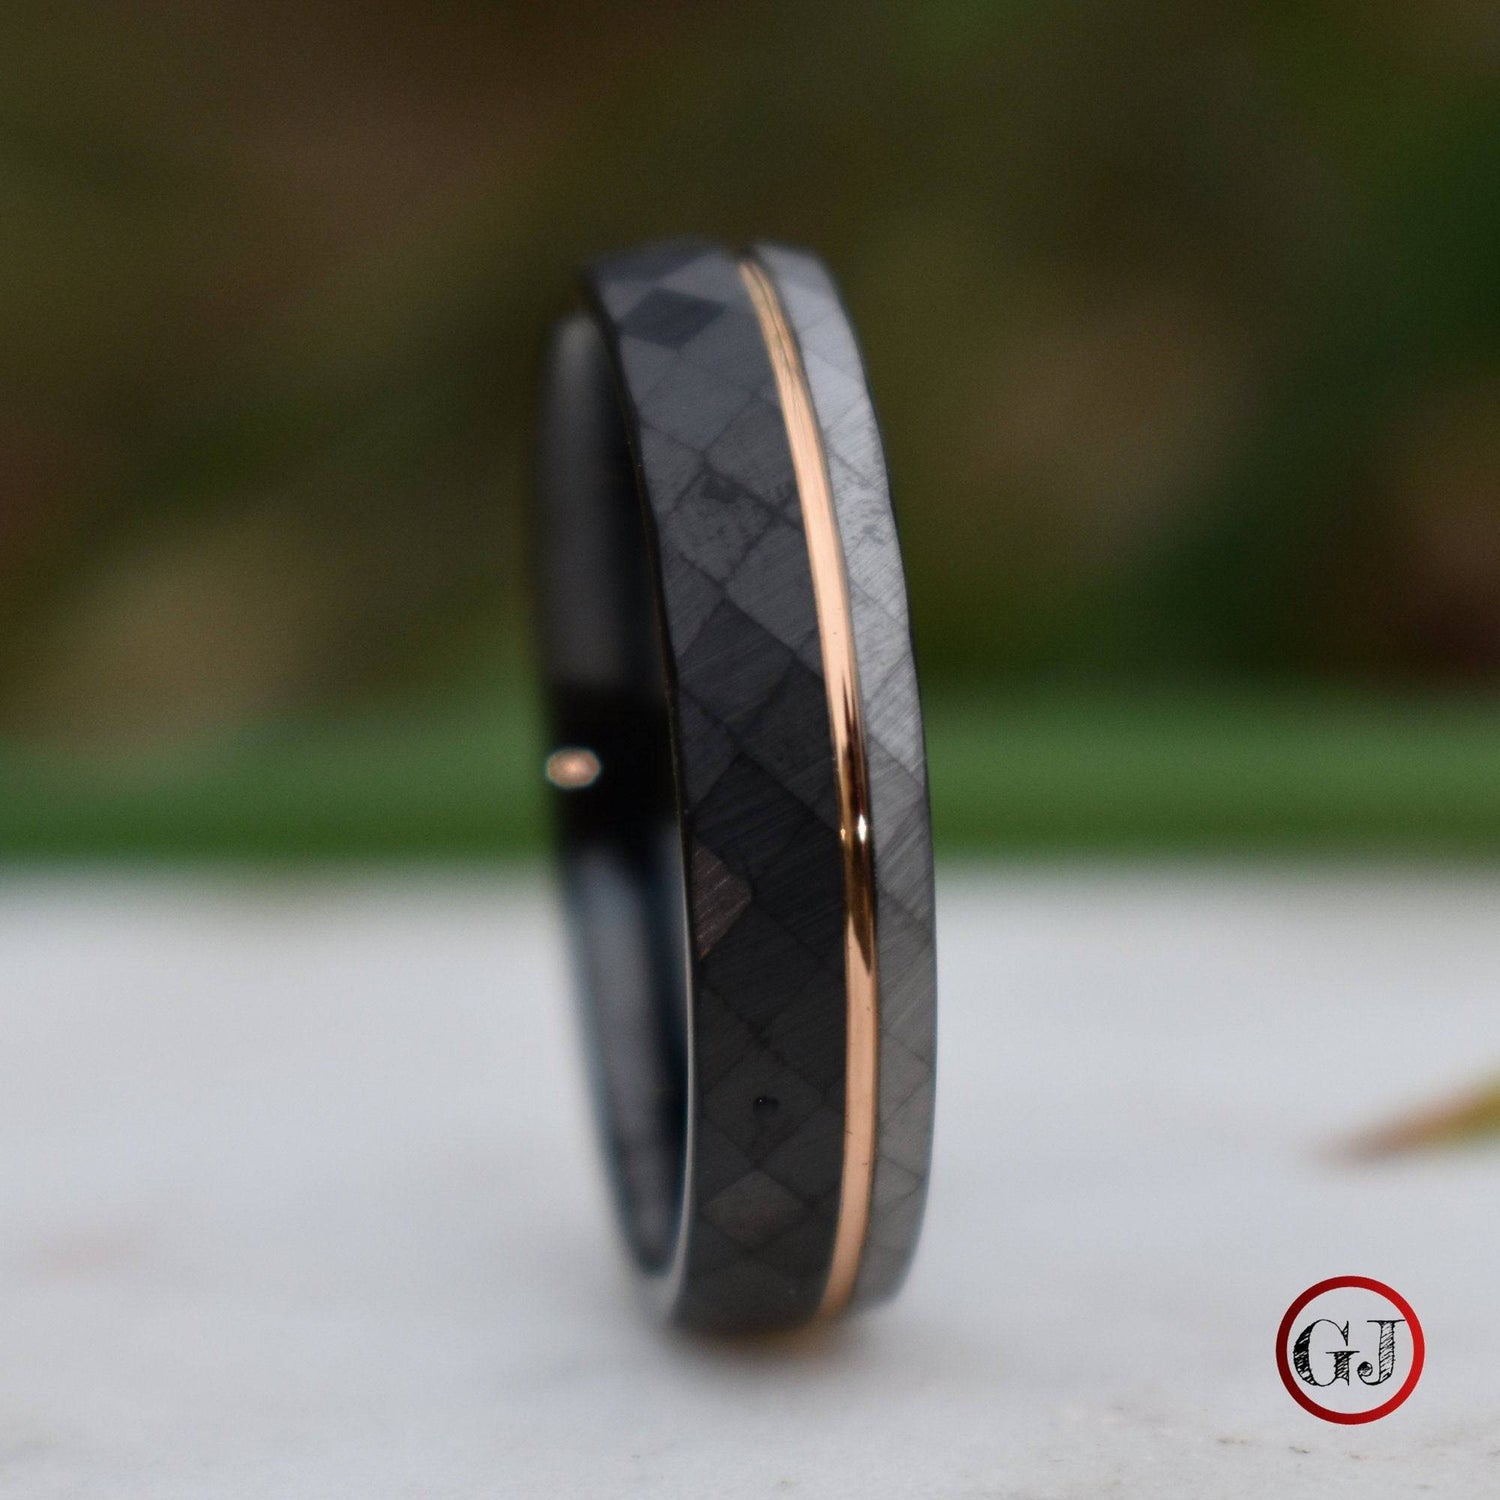 Hammered 6mm Tungsten Ring Black and Silver Brushed with Rose Gold Accent - Tungsten Titans